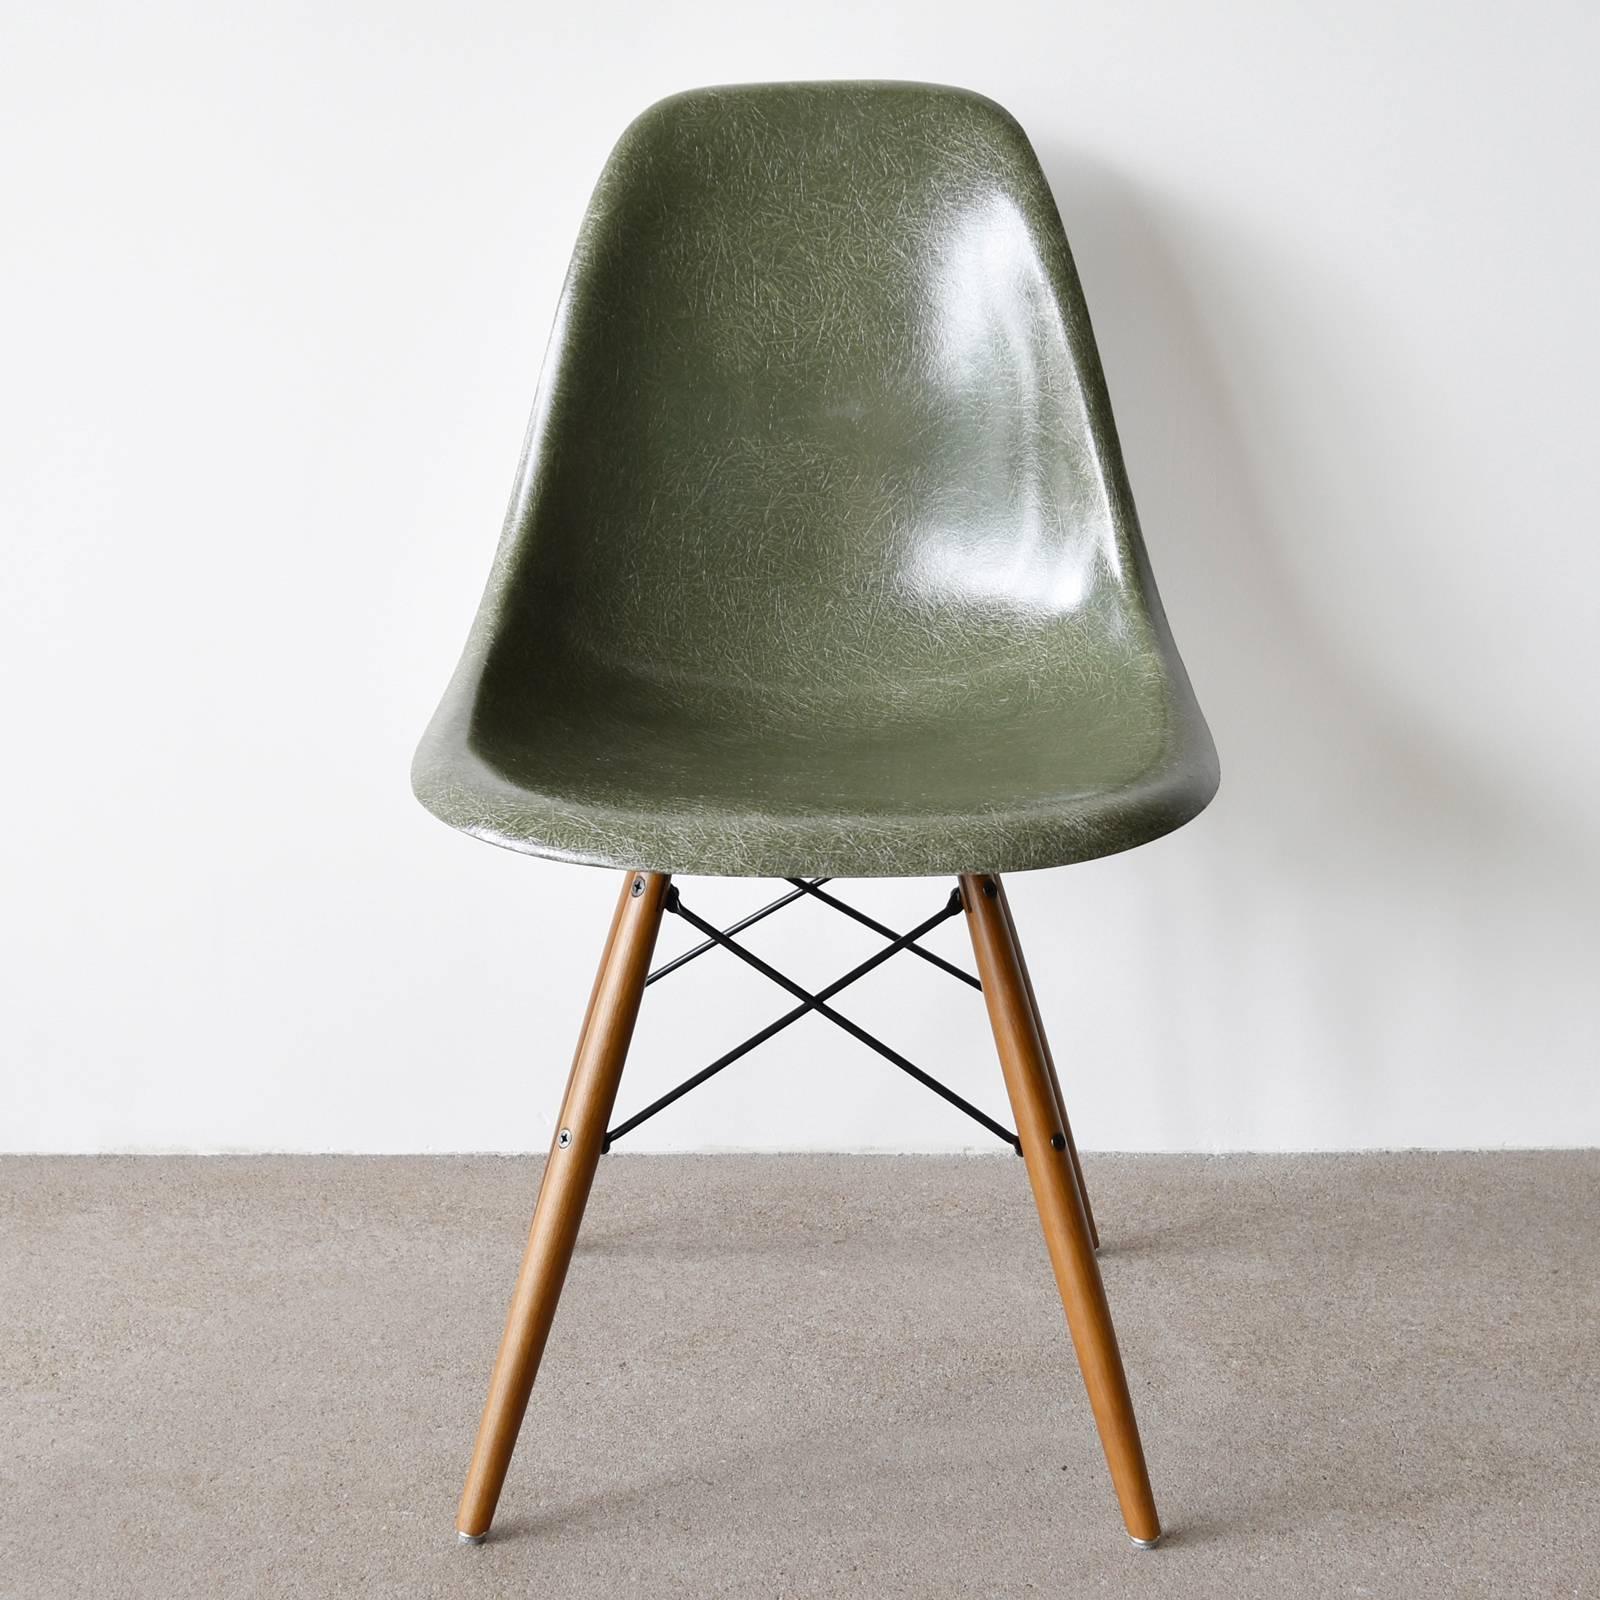 Beautiful iconic olive green dark DSW chairs. The shells are in very good / excellent condition with only slight traces of use. Replaced shock mounts which guarantee save usability for the next decades. Each chair is signed with embossed Herman